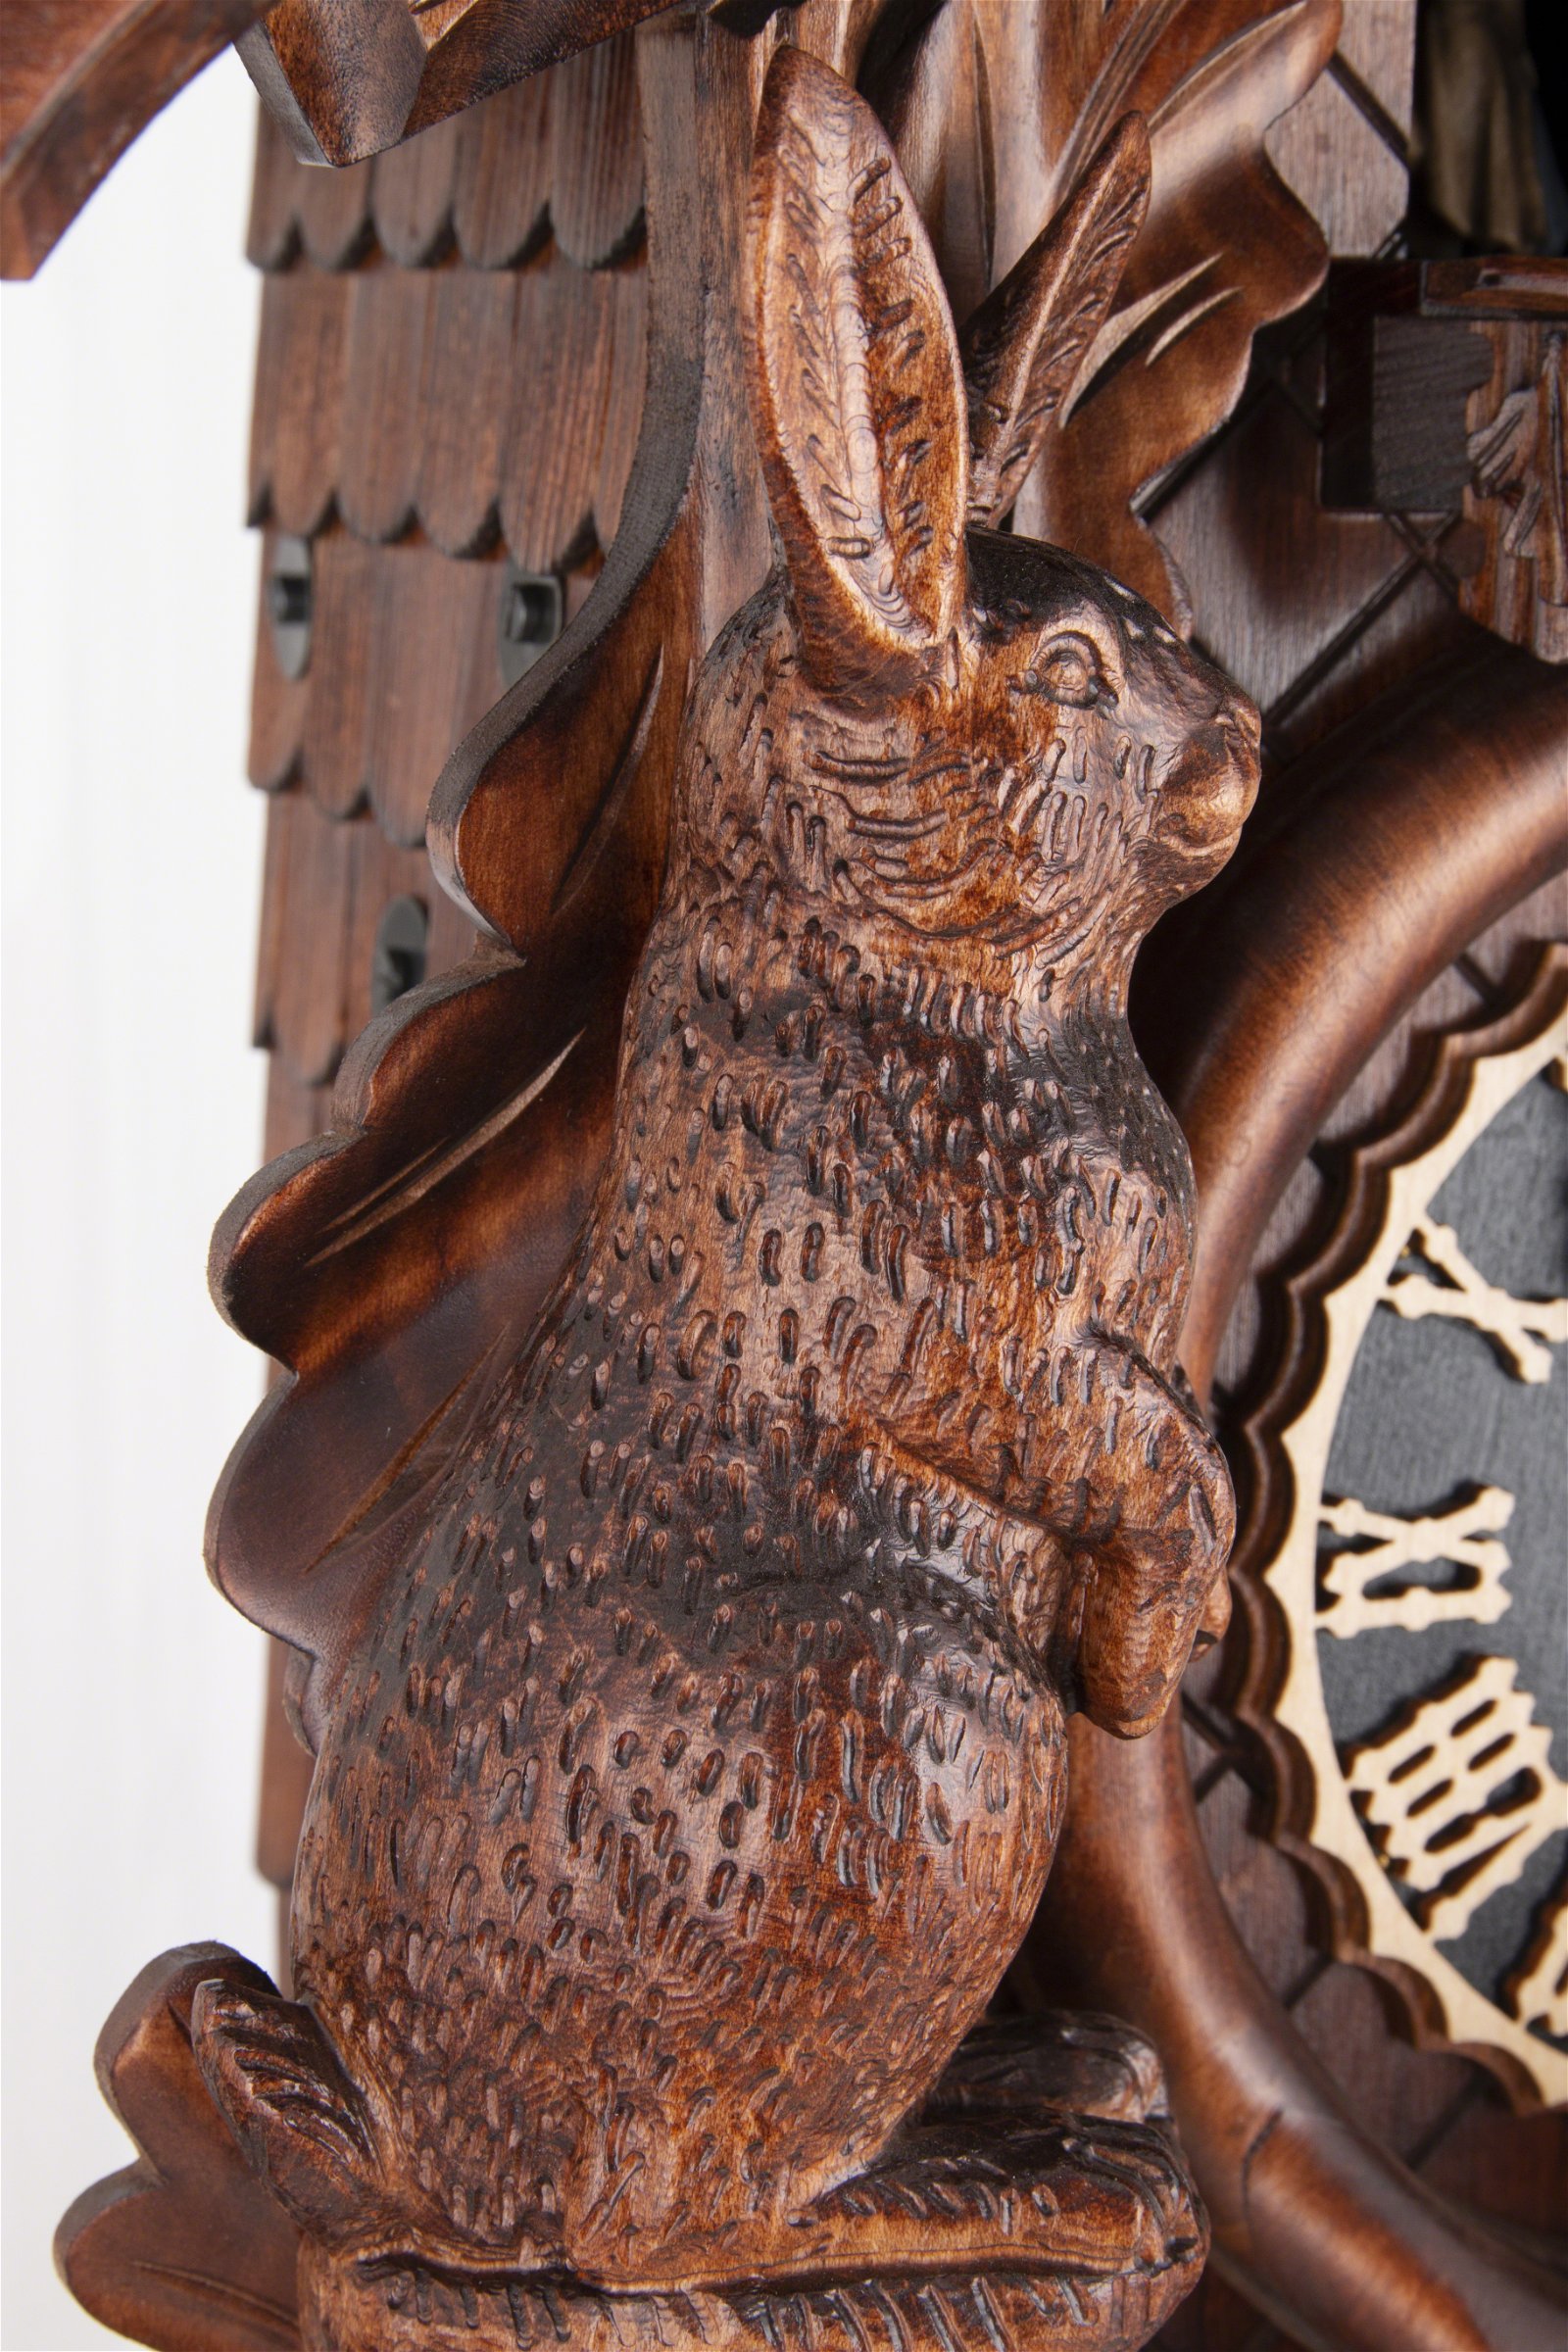 Cuckoo Clock Carved Style 8 Day Movement 80cm by Hönes